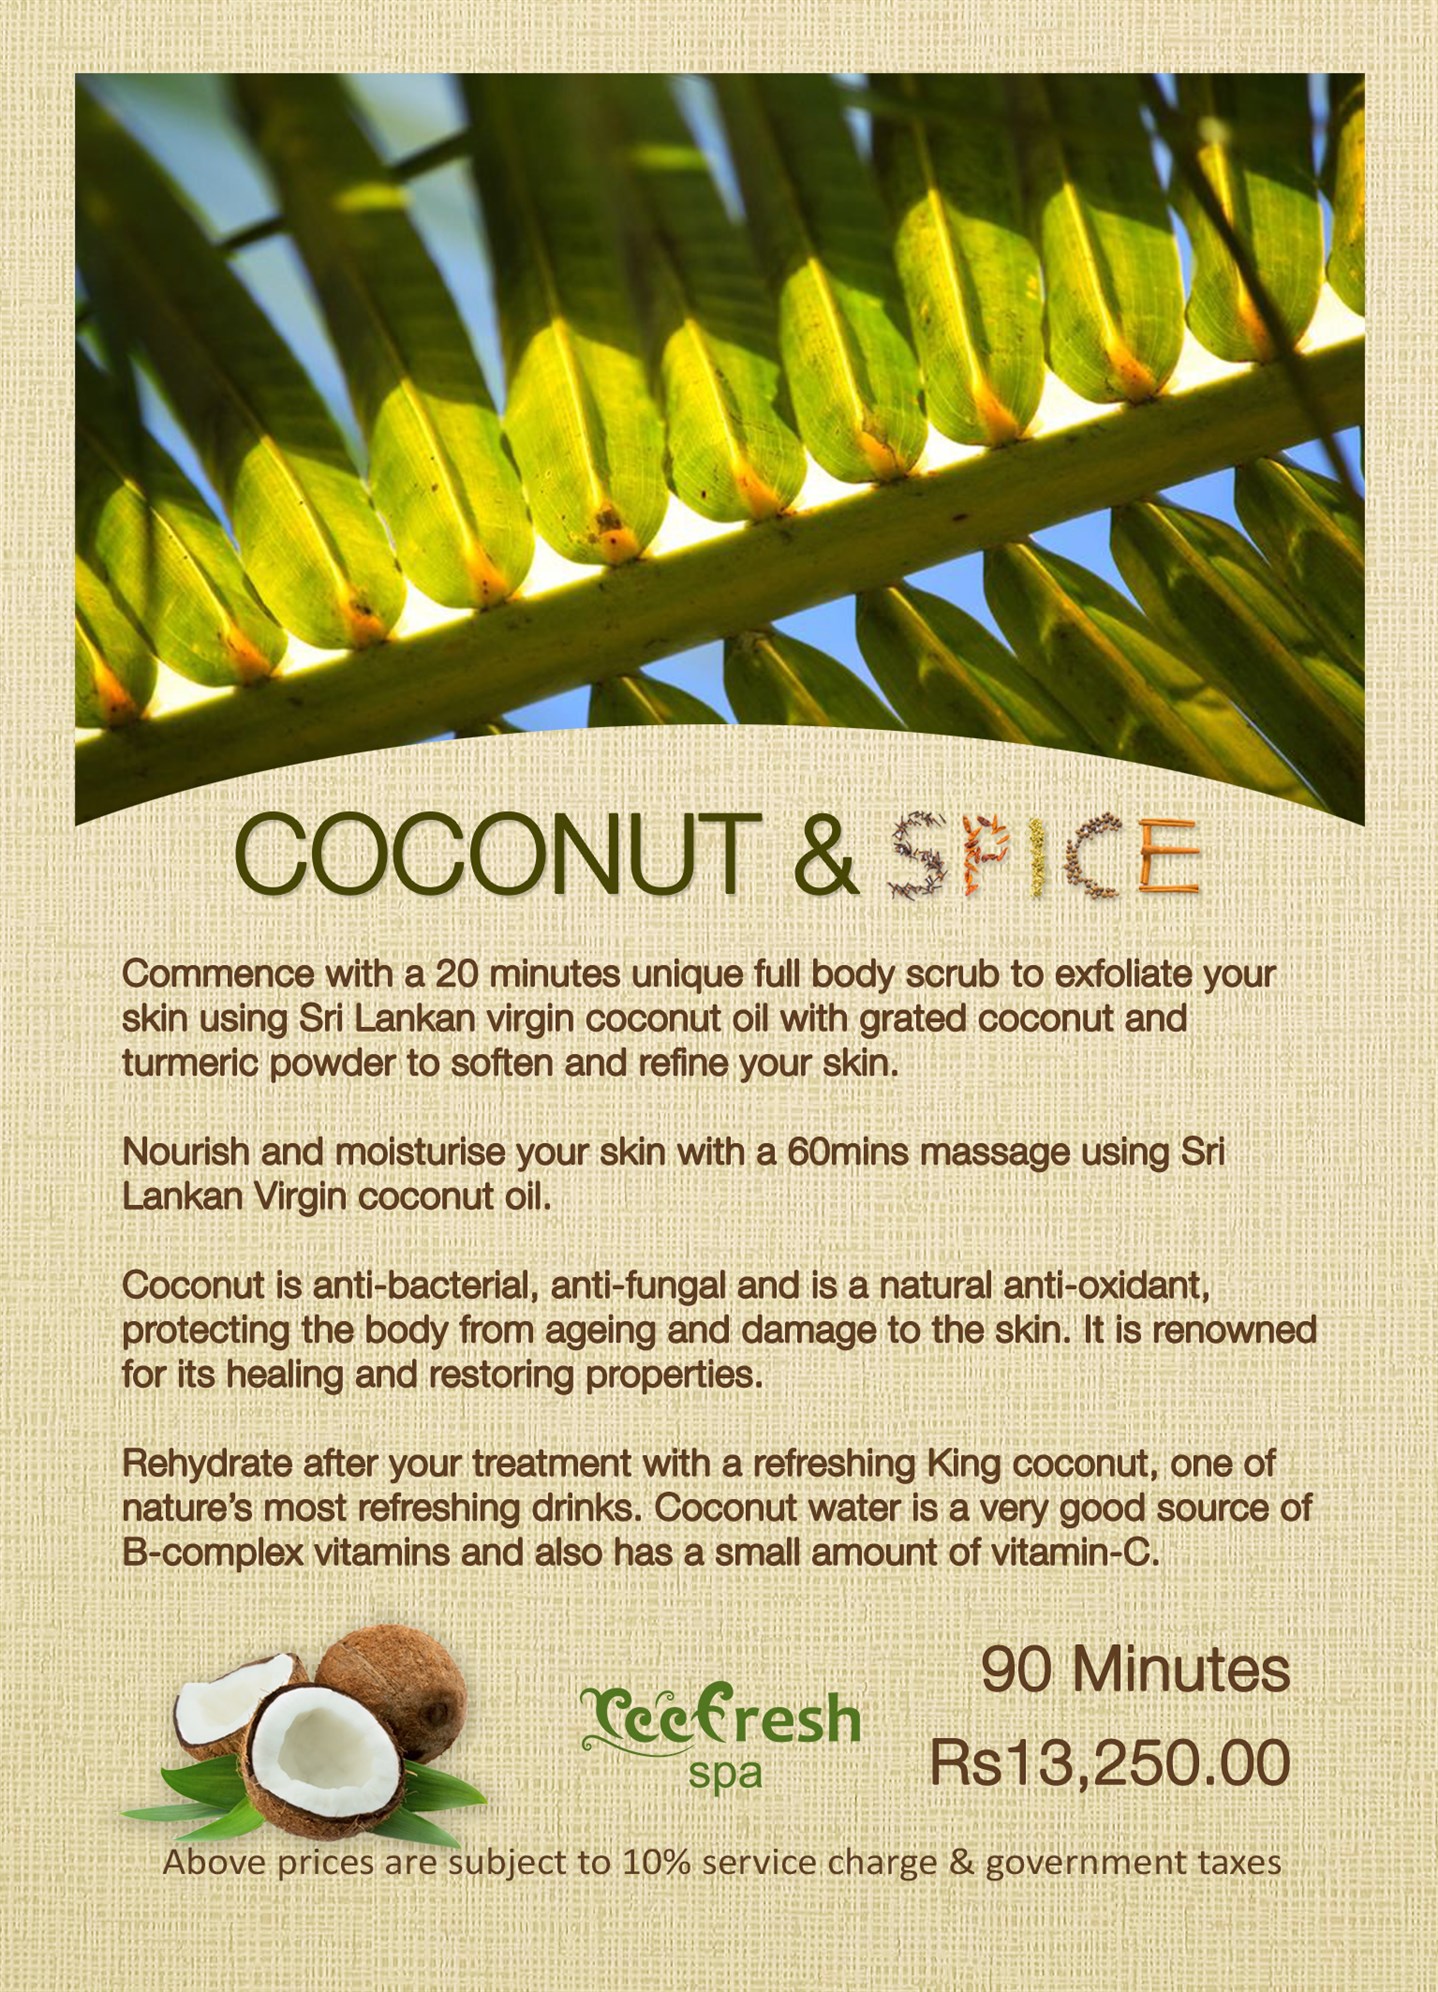 Discover our New Coconut and Spice Exfoliating Scrub and Massage